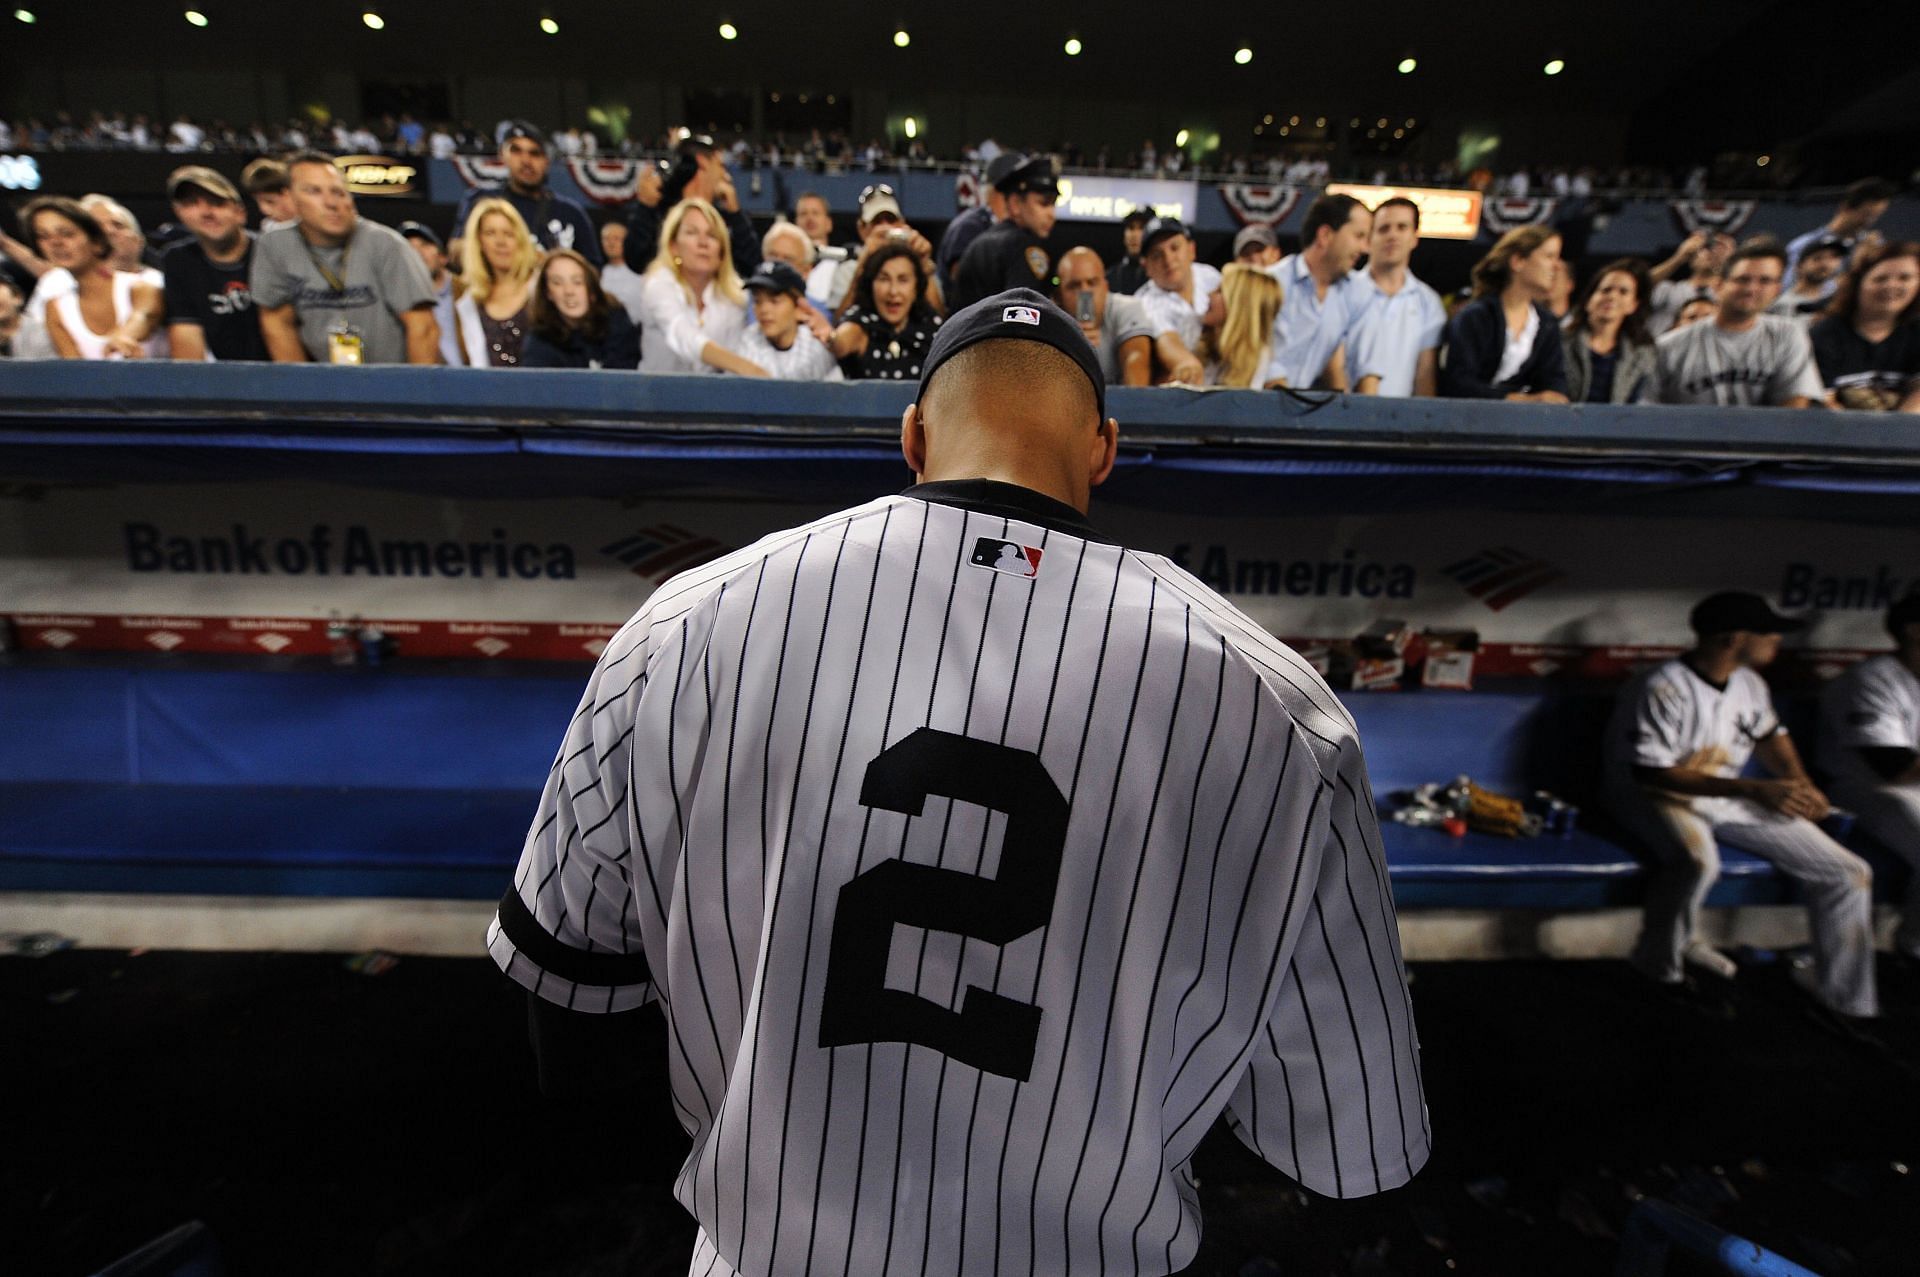 Derek Jeter #2 of the New York Yankees signs autographs for fans after winning the last regular season game at Yankee Stadium 7-3 against the Baltimore Orioles on September 21, 2008 in the Bronx borough of New York City. The Yankees are playing their final season in the 85-year-old ballpark and plan on moving into the new Yankee Stadium across the street to start the 09 season.